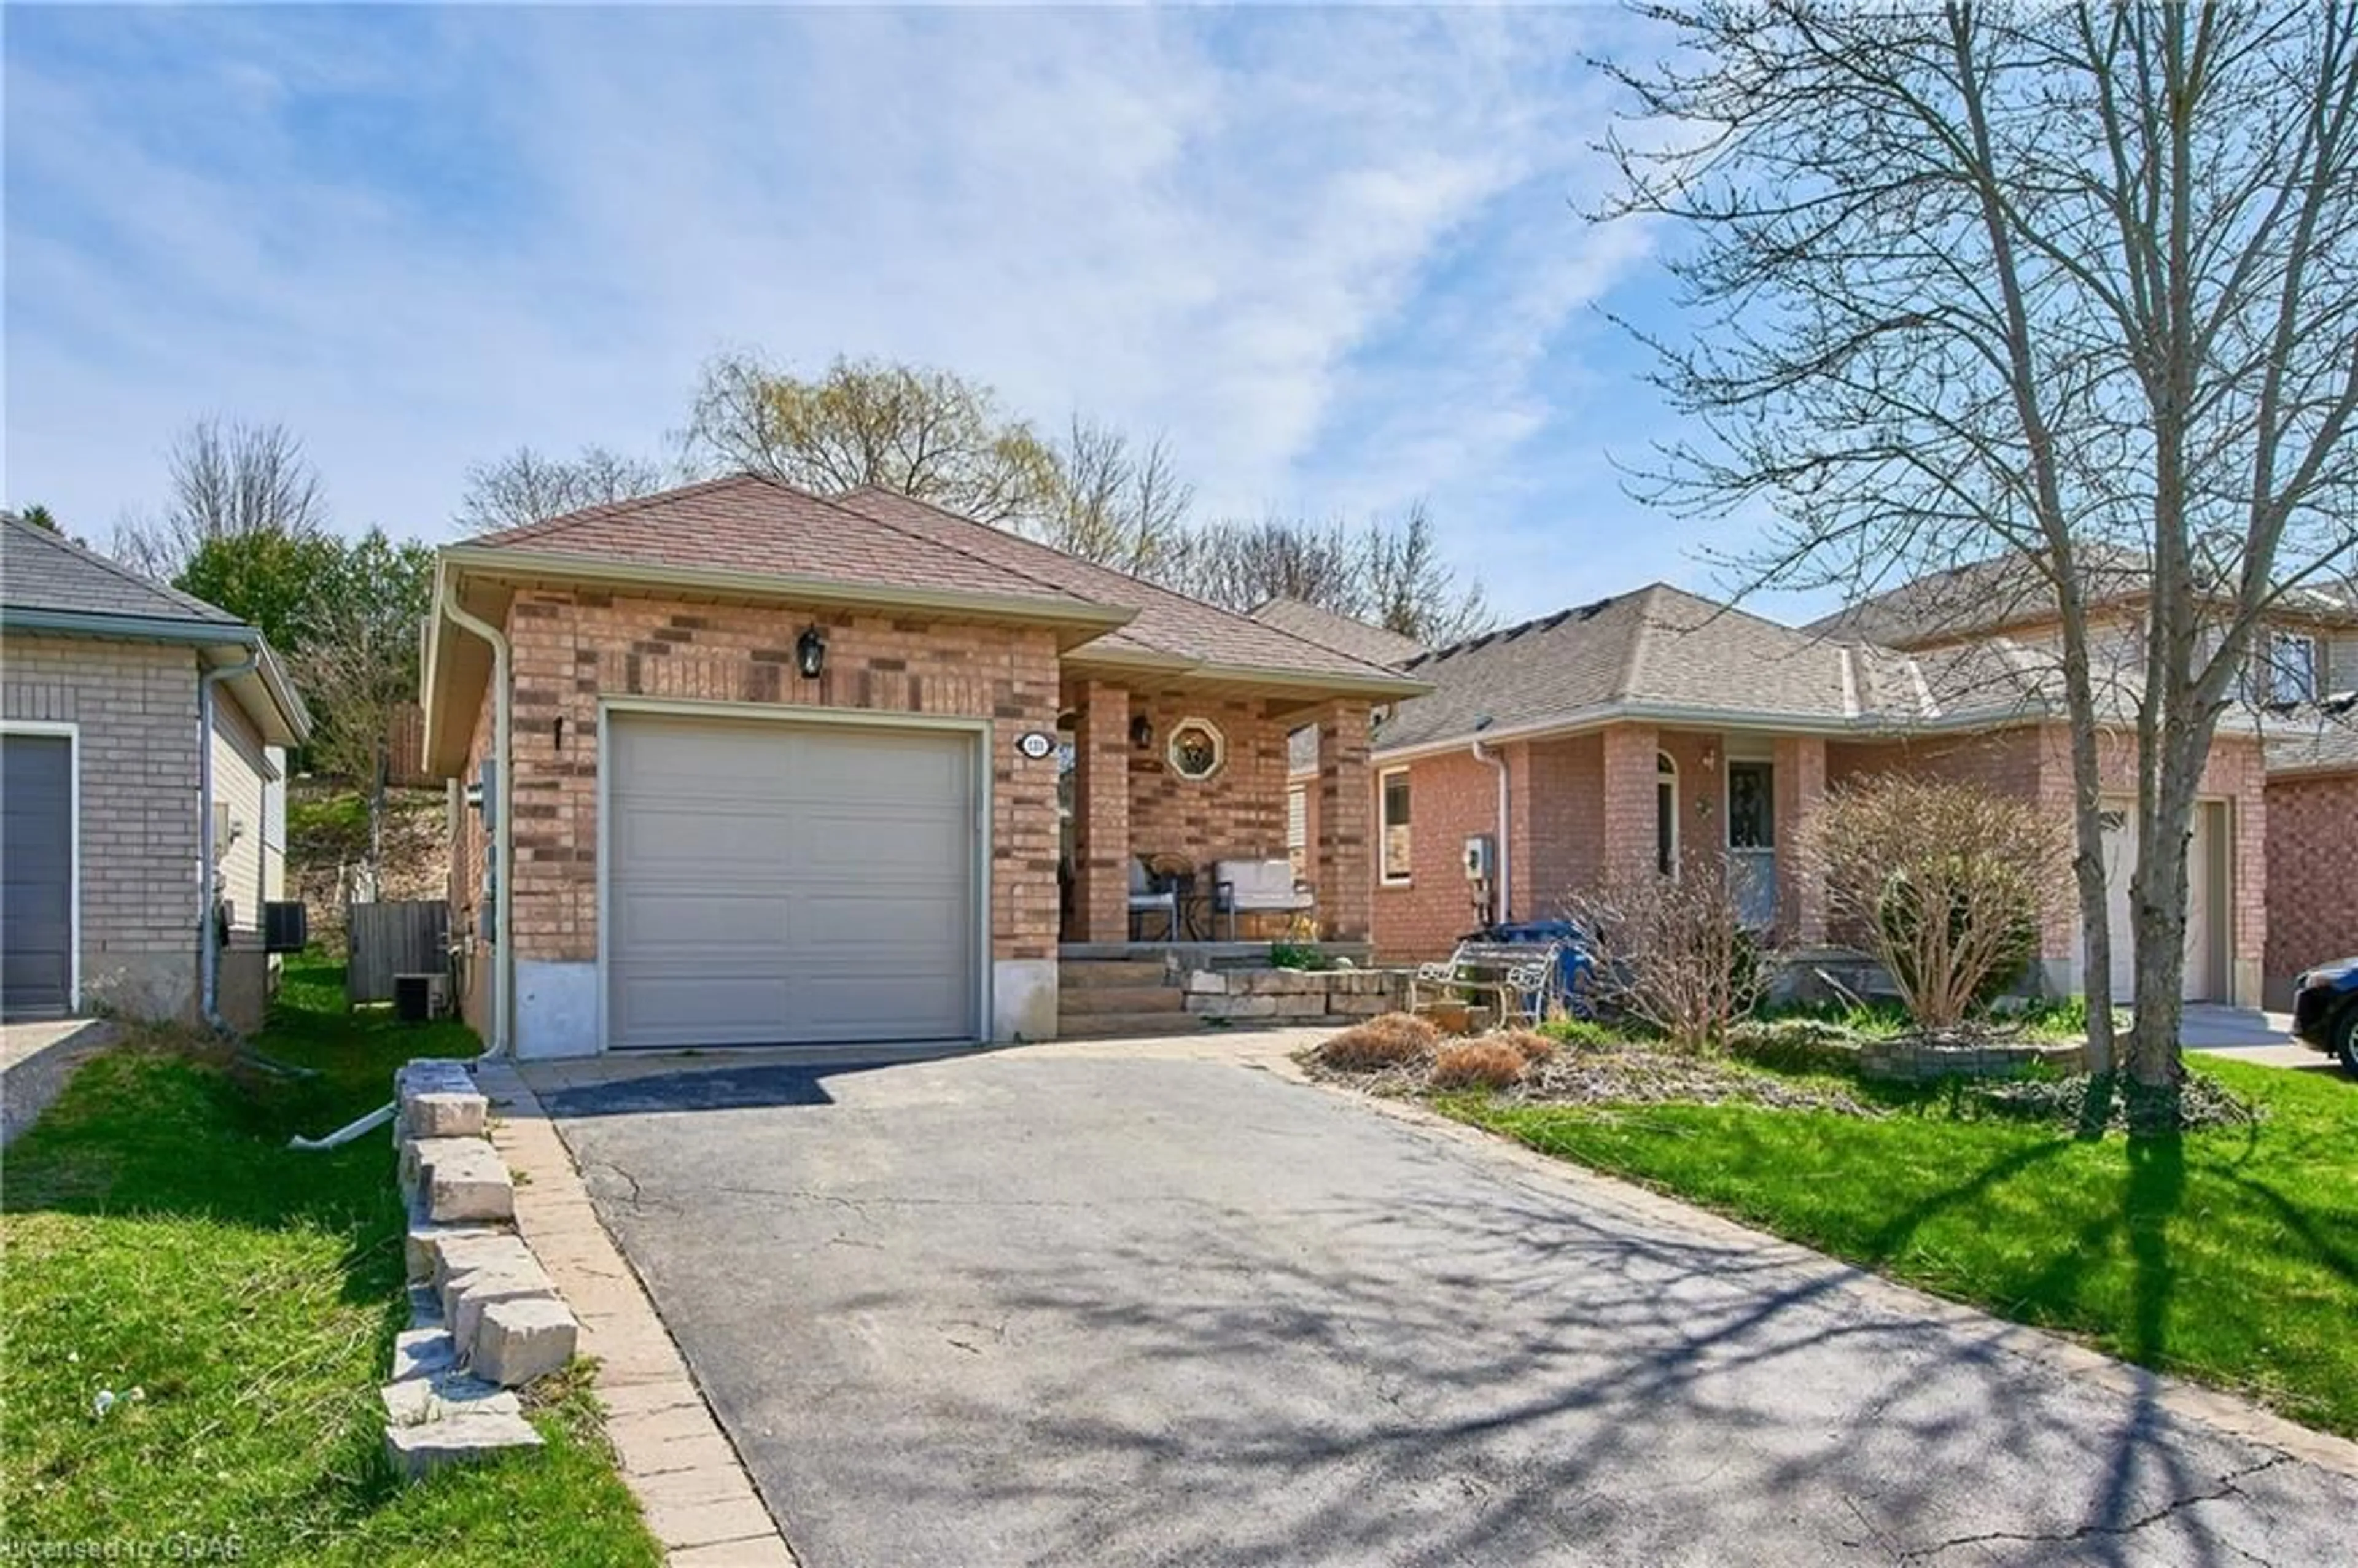 Home with brick exterior material for 131 Ptarmigan Dr, Guelph Ontario N1C 1E9